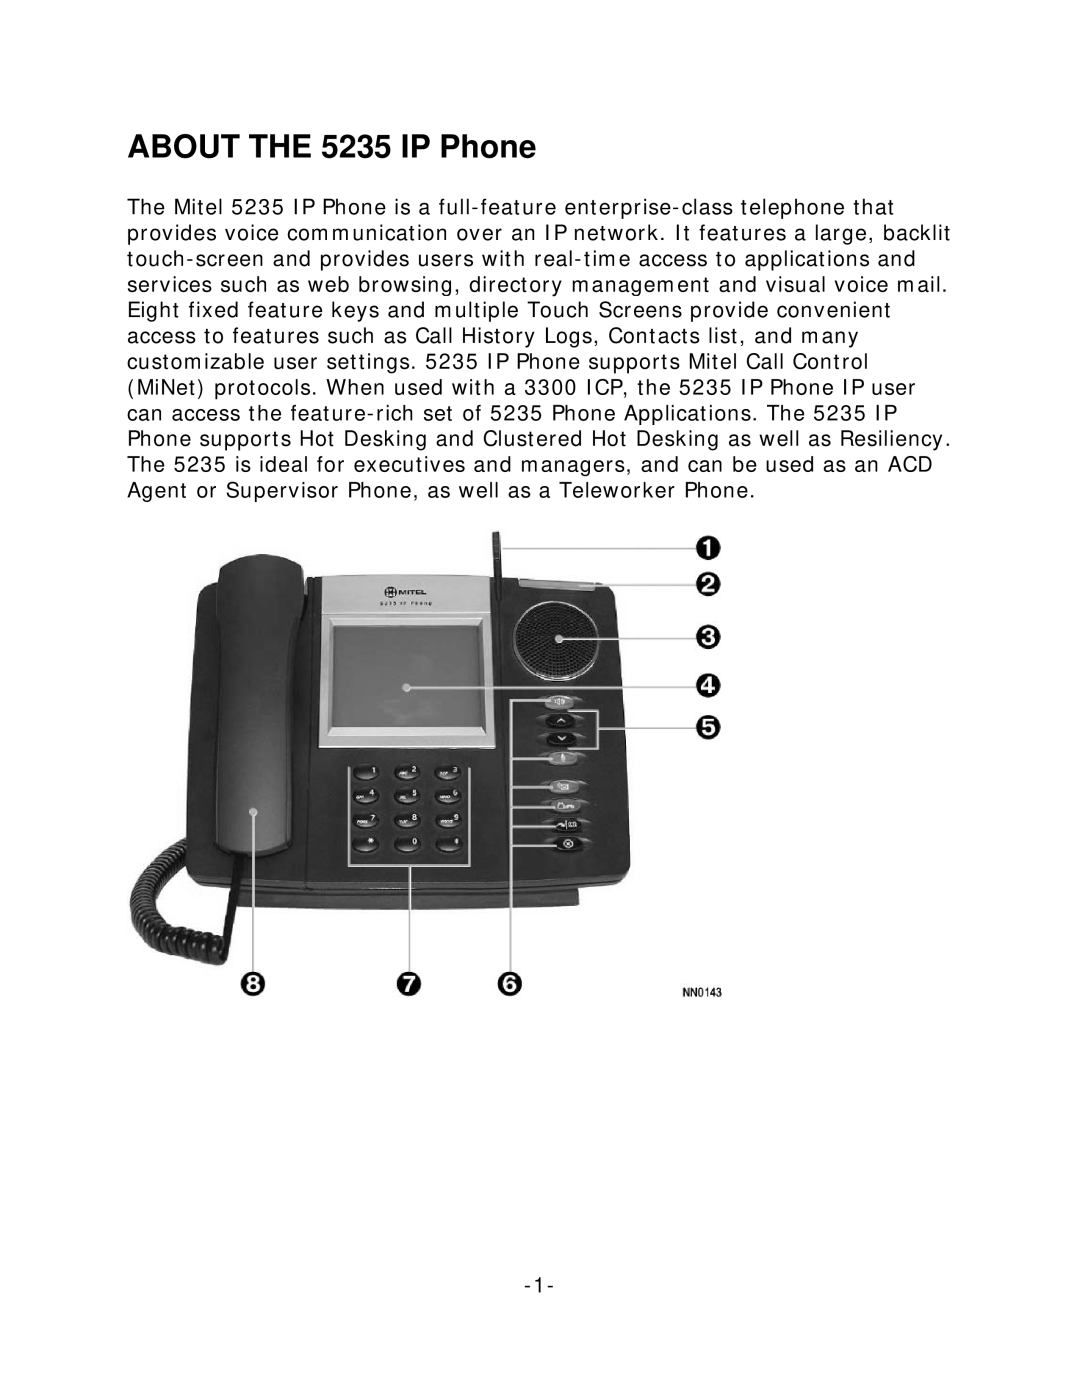 Mitel manual ABOUT THE 5235 IP Phone 